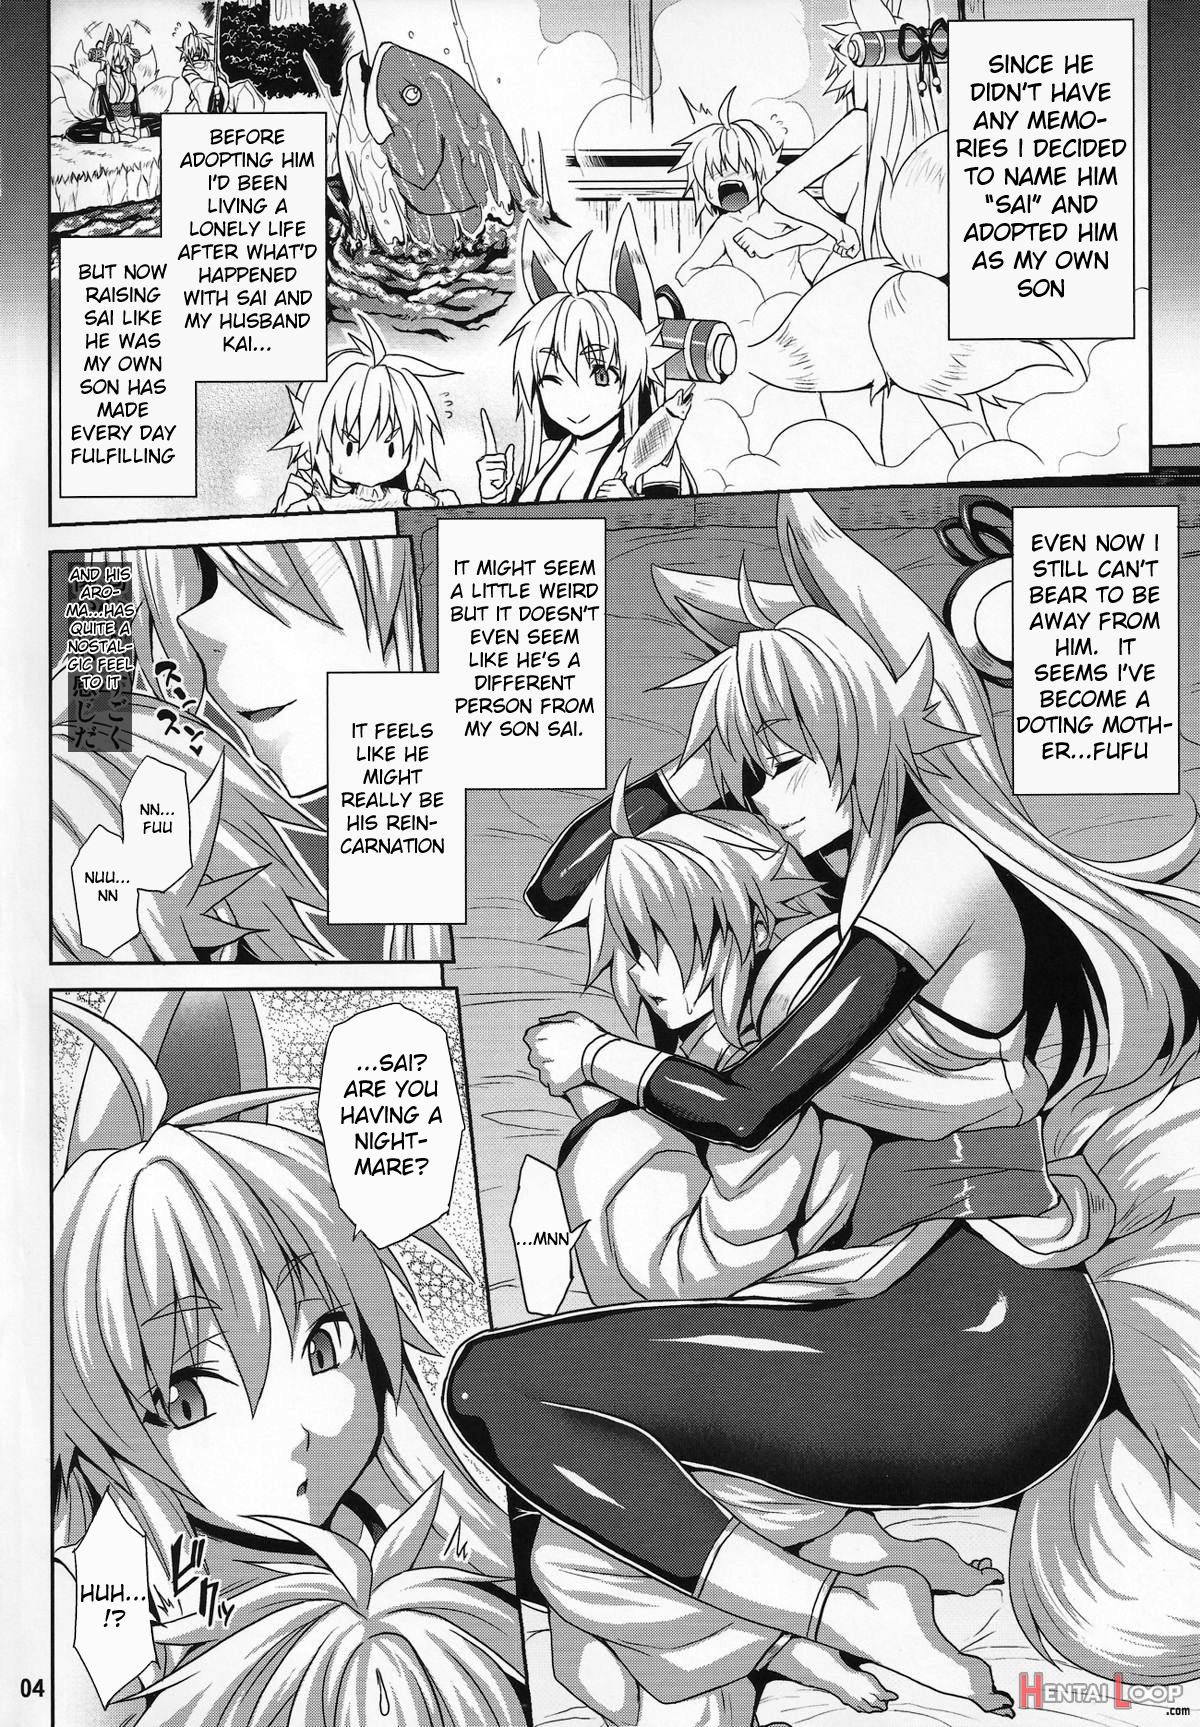 Living With A Lewd Spirit Beast page 3